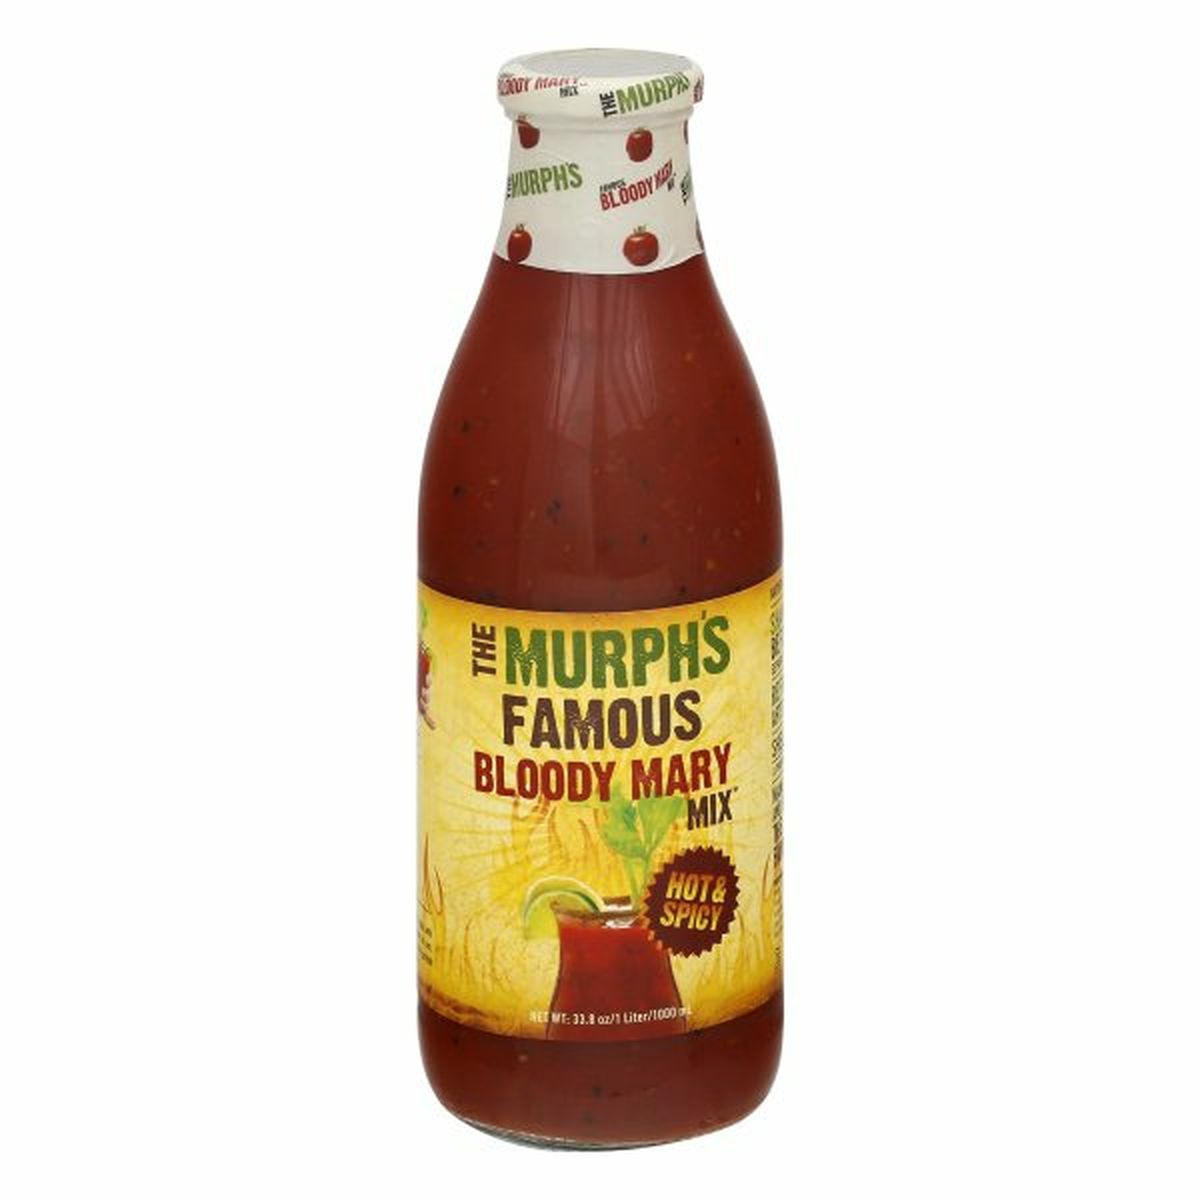 Calories in The Murph's Bloody Mary Mix, Hot & Spicy